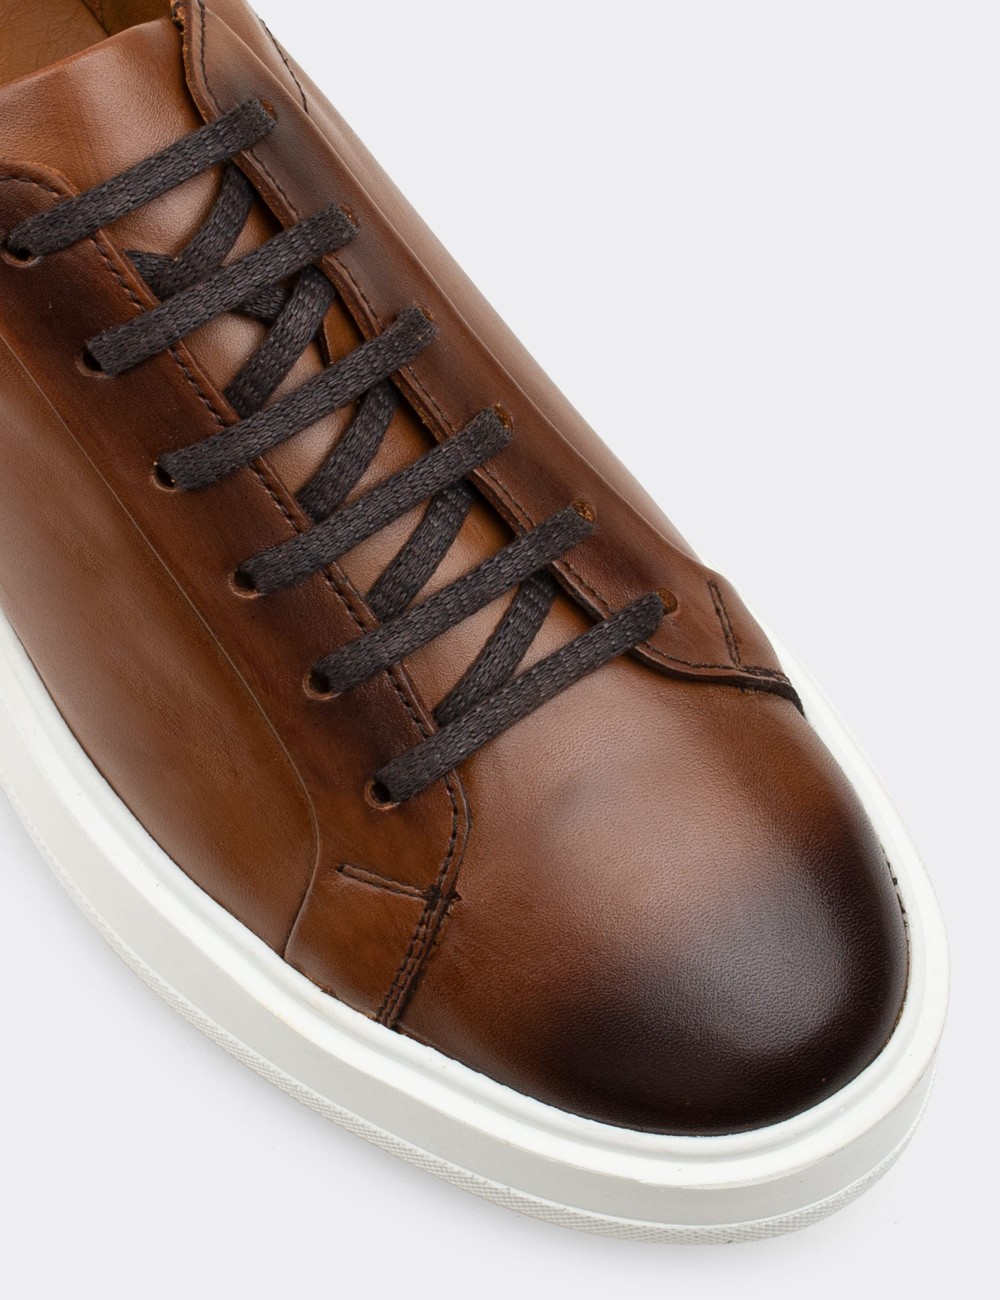 Tan  Leather Lace-up Shoes - 01829MTBAP02